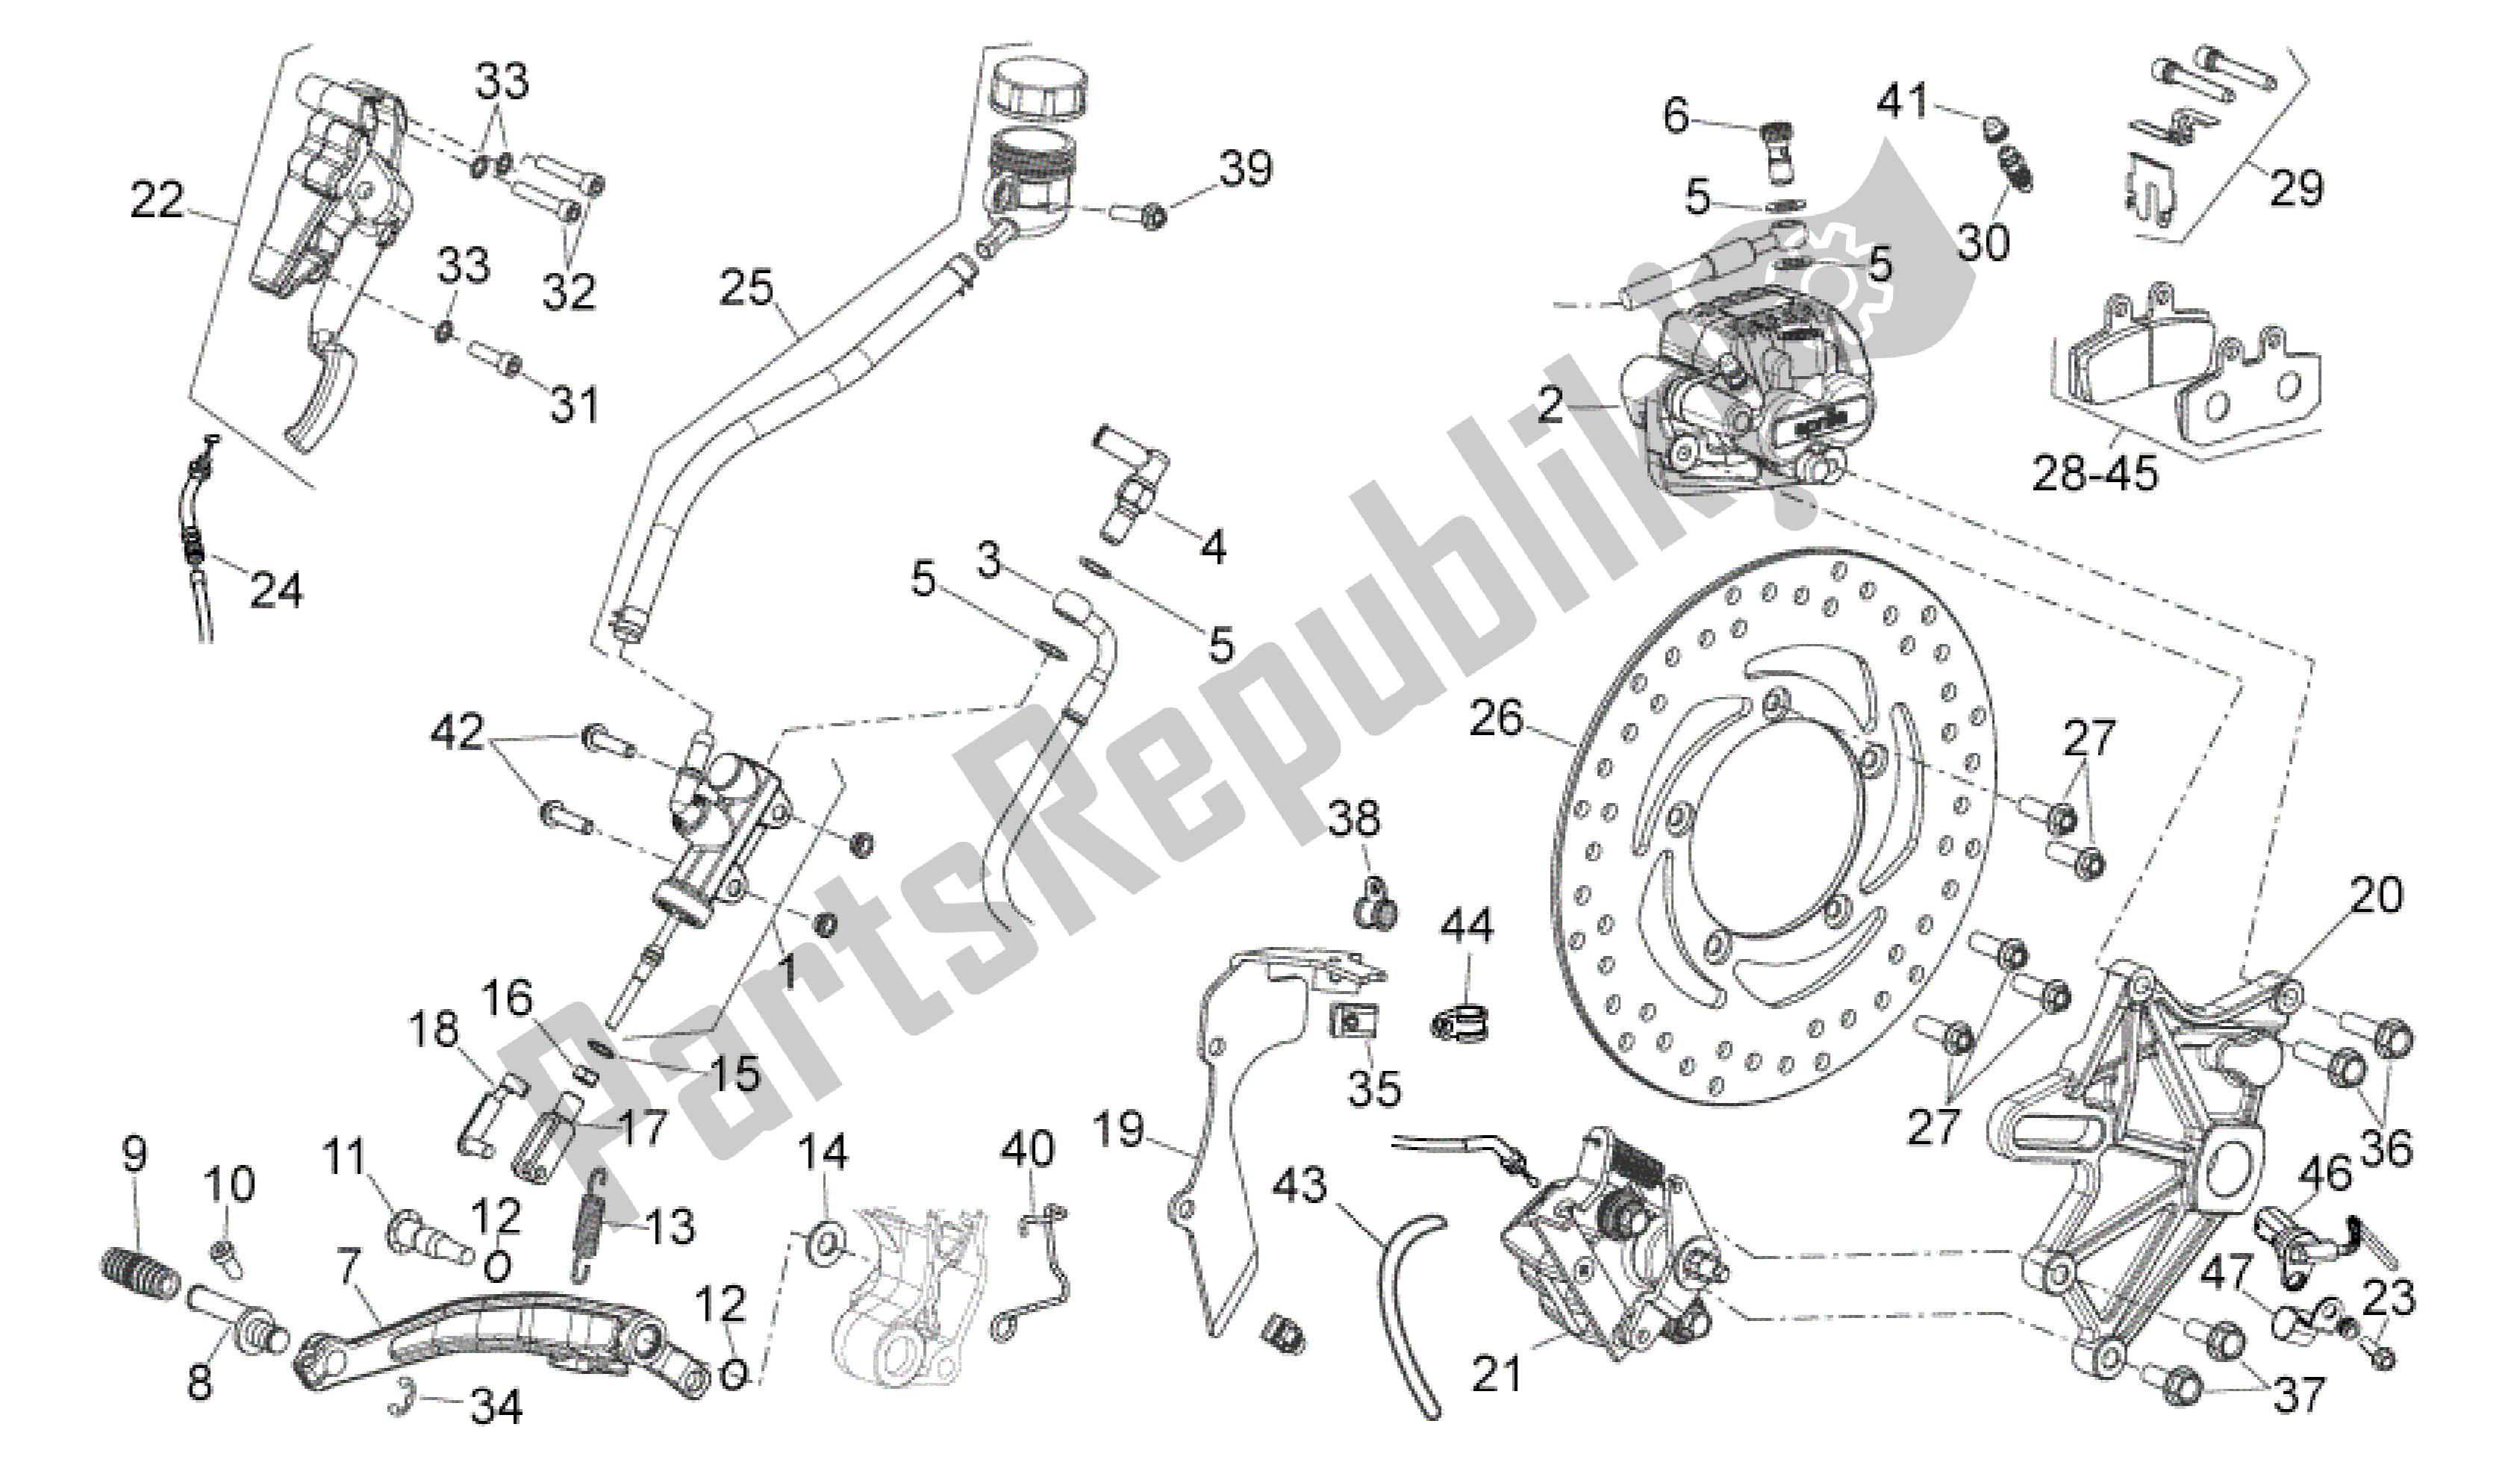 All parts for the Rear Brake System of the Aprilia Mana 850 2009 - 2011